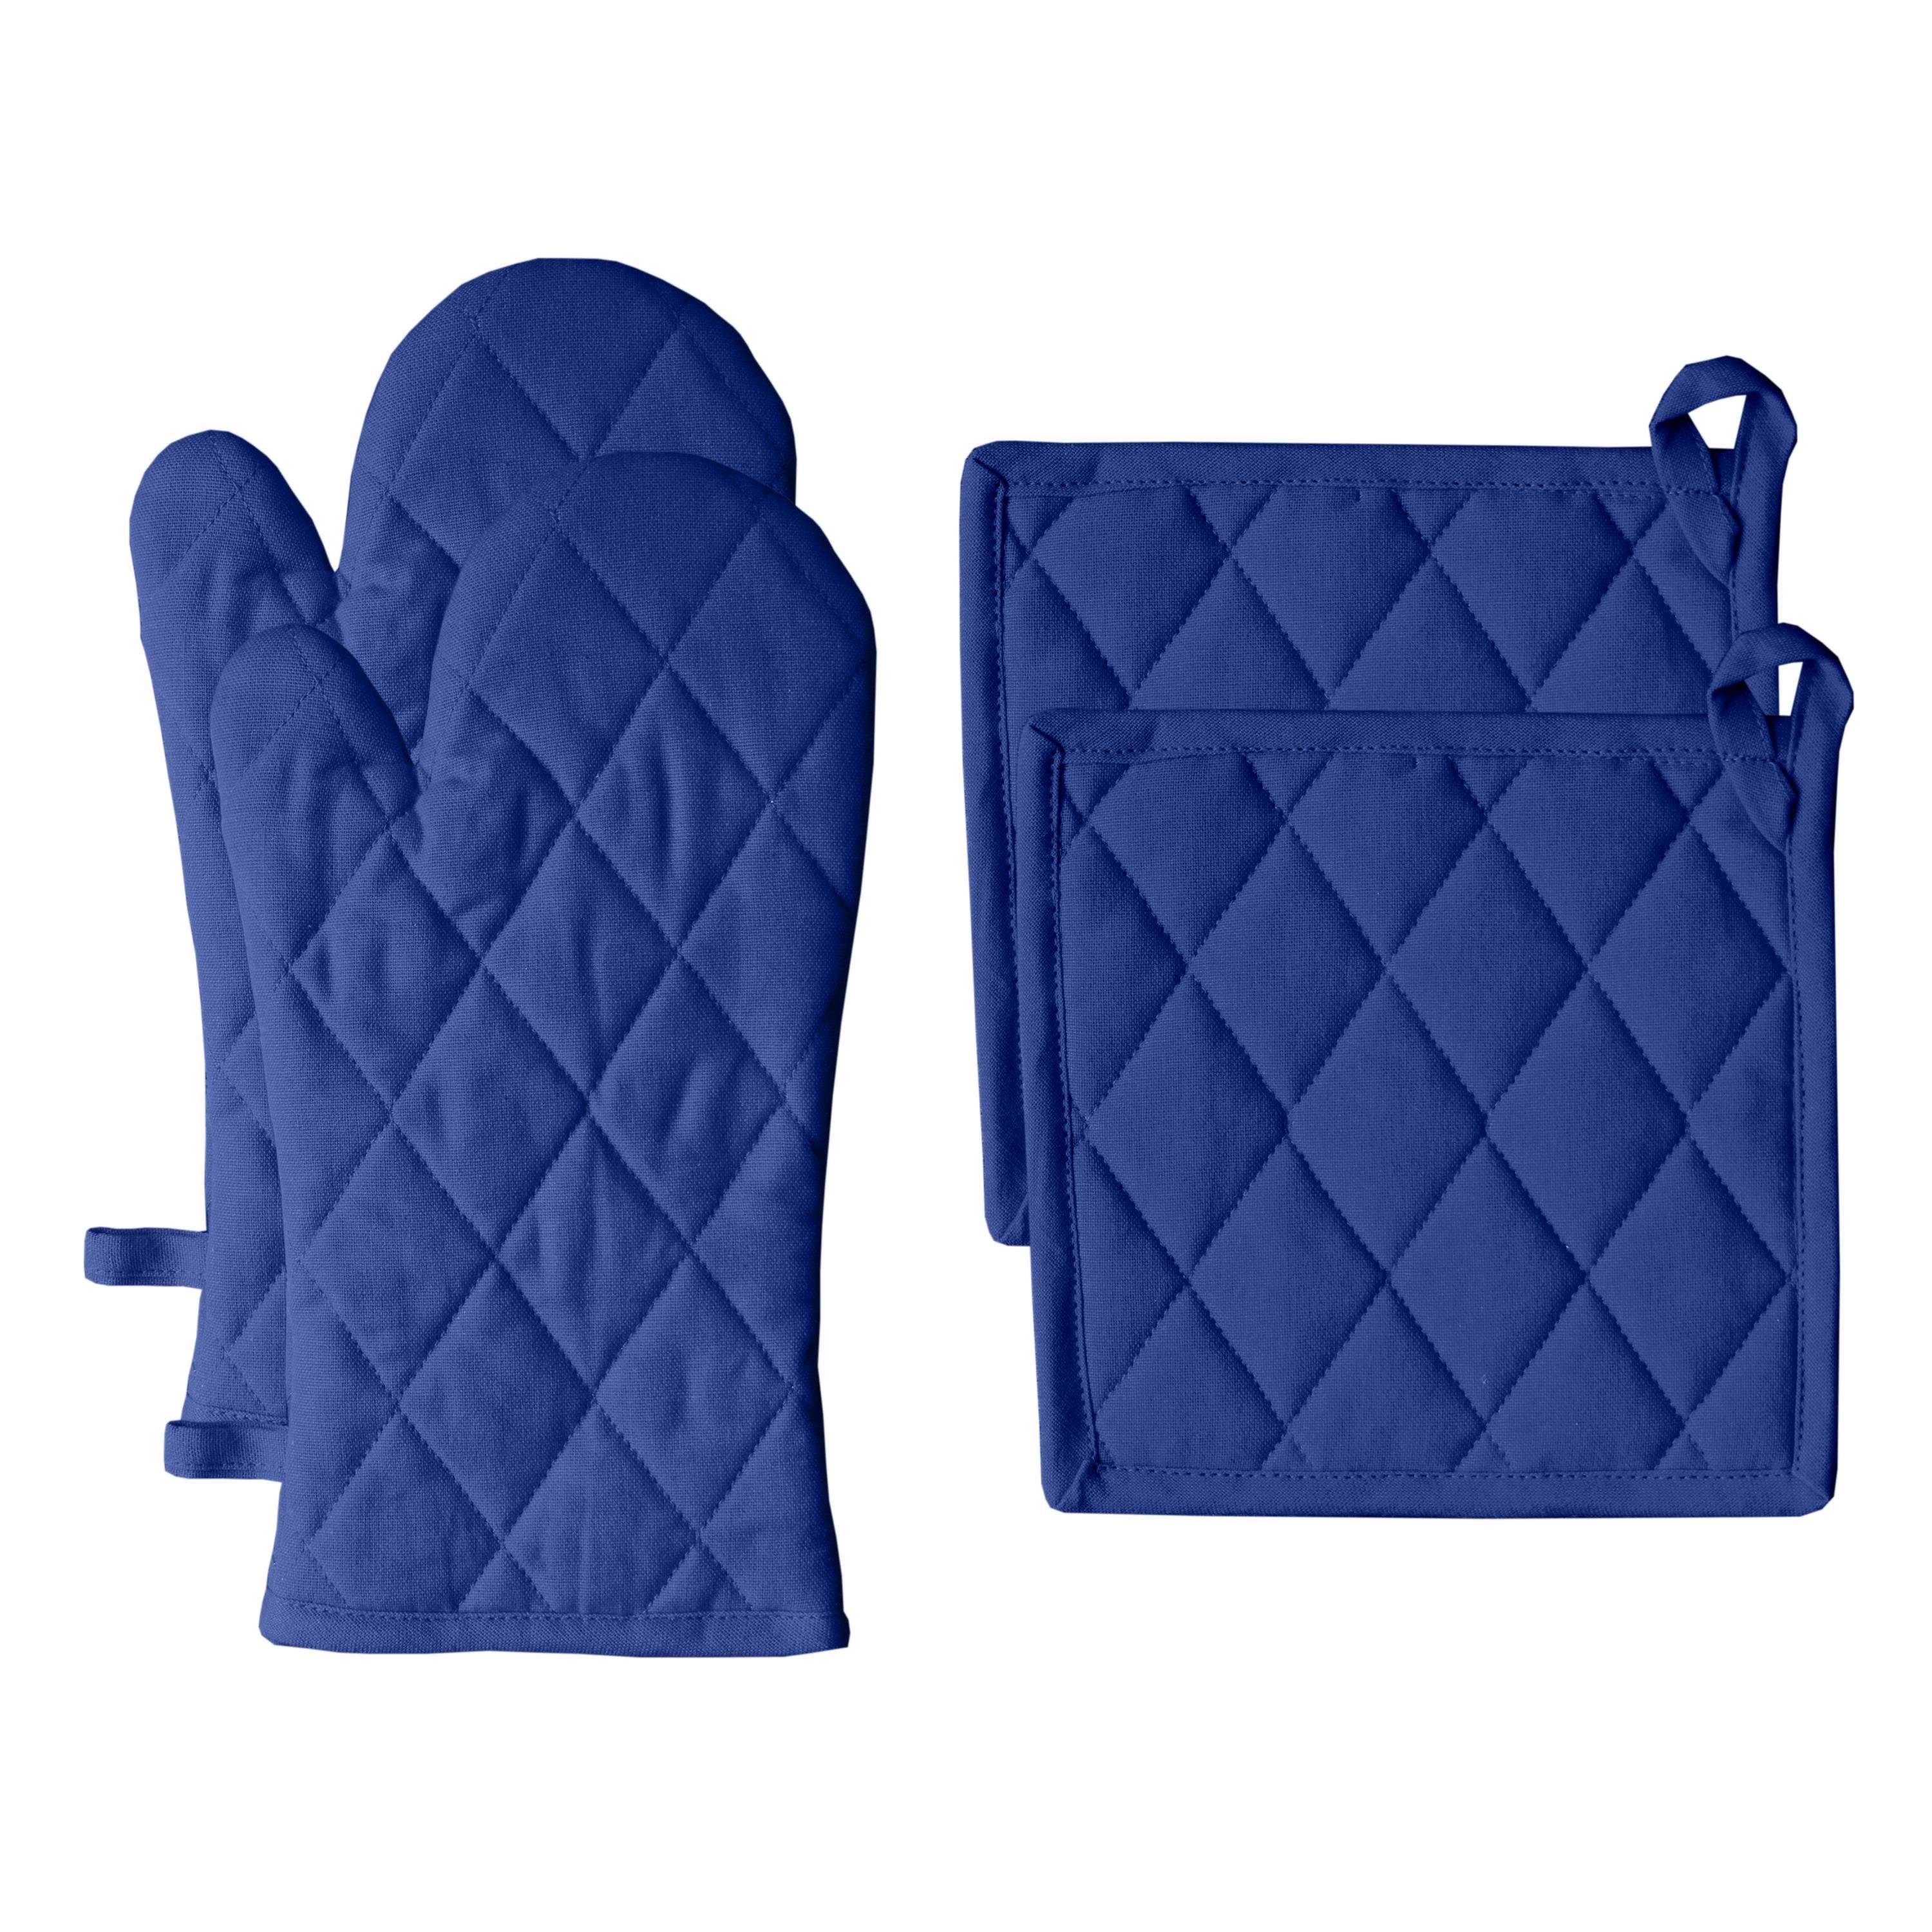 3 Pc~ NAVY BLUE Pot Holders And Oven Mitt Free Shipping